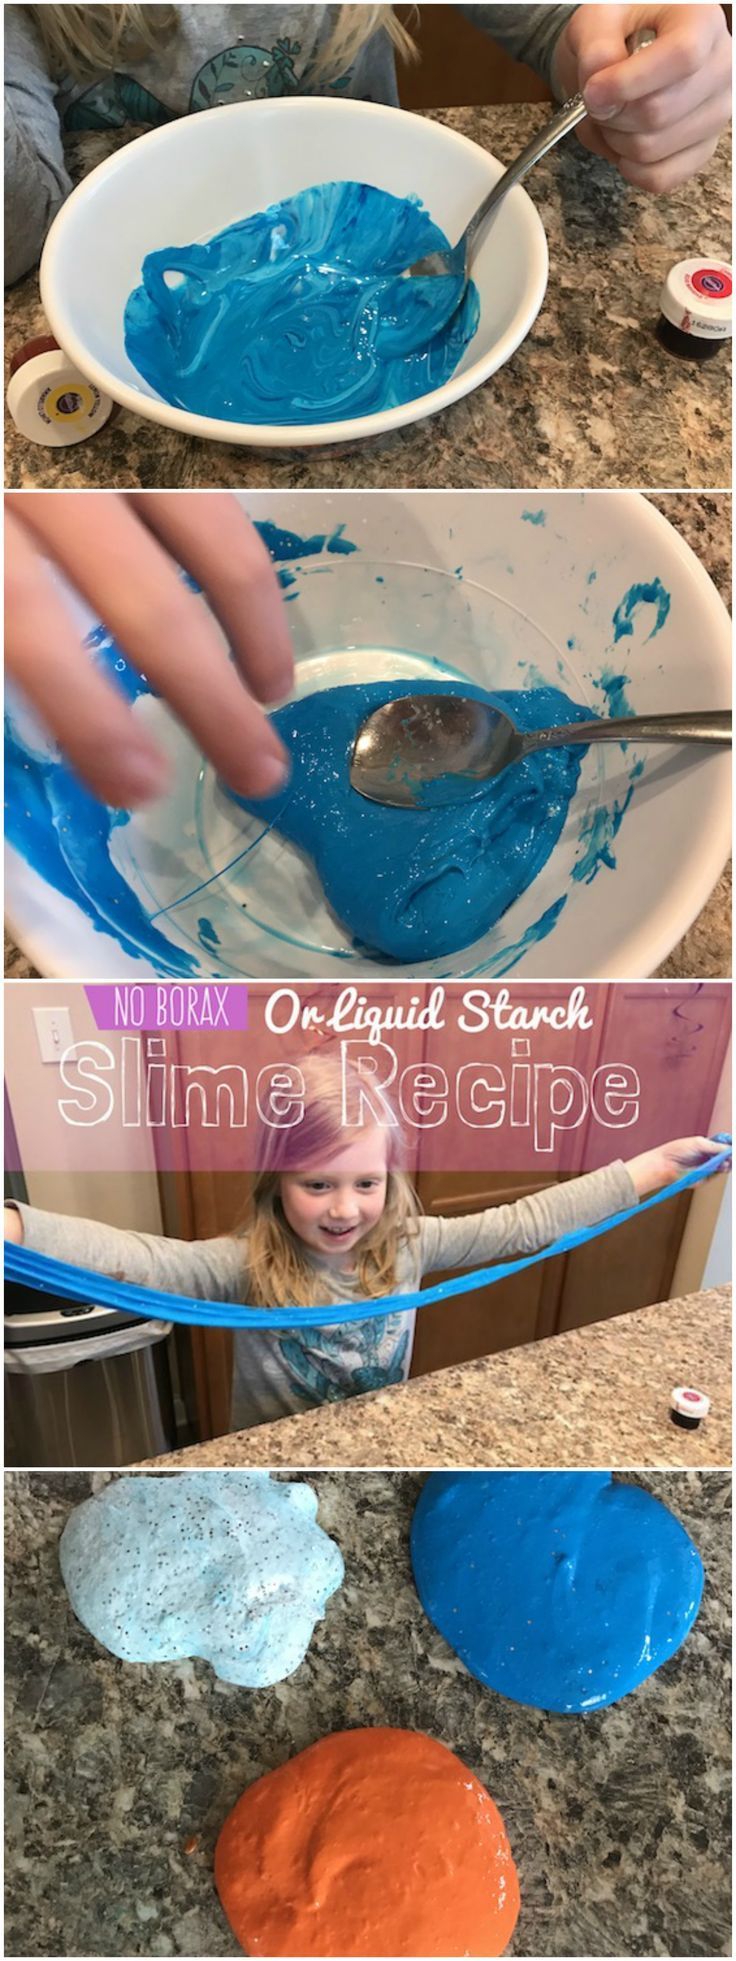 How To Make Slime Without Borax Or Liquid Starch - How To Make Slime Without Borax Or Liquid Starch -   19 diy Slime without borax ideas